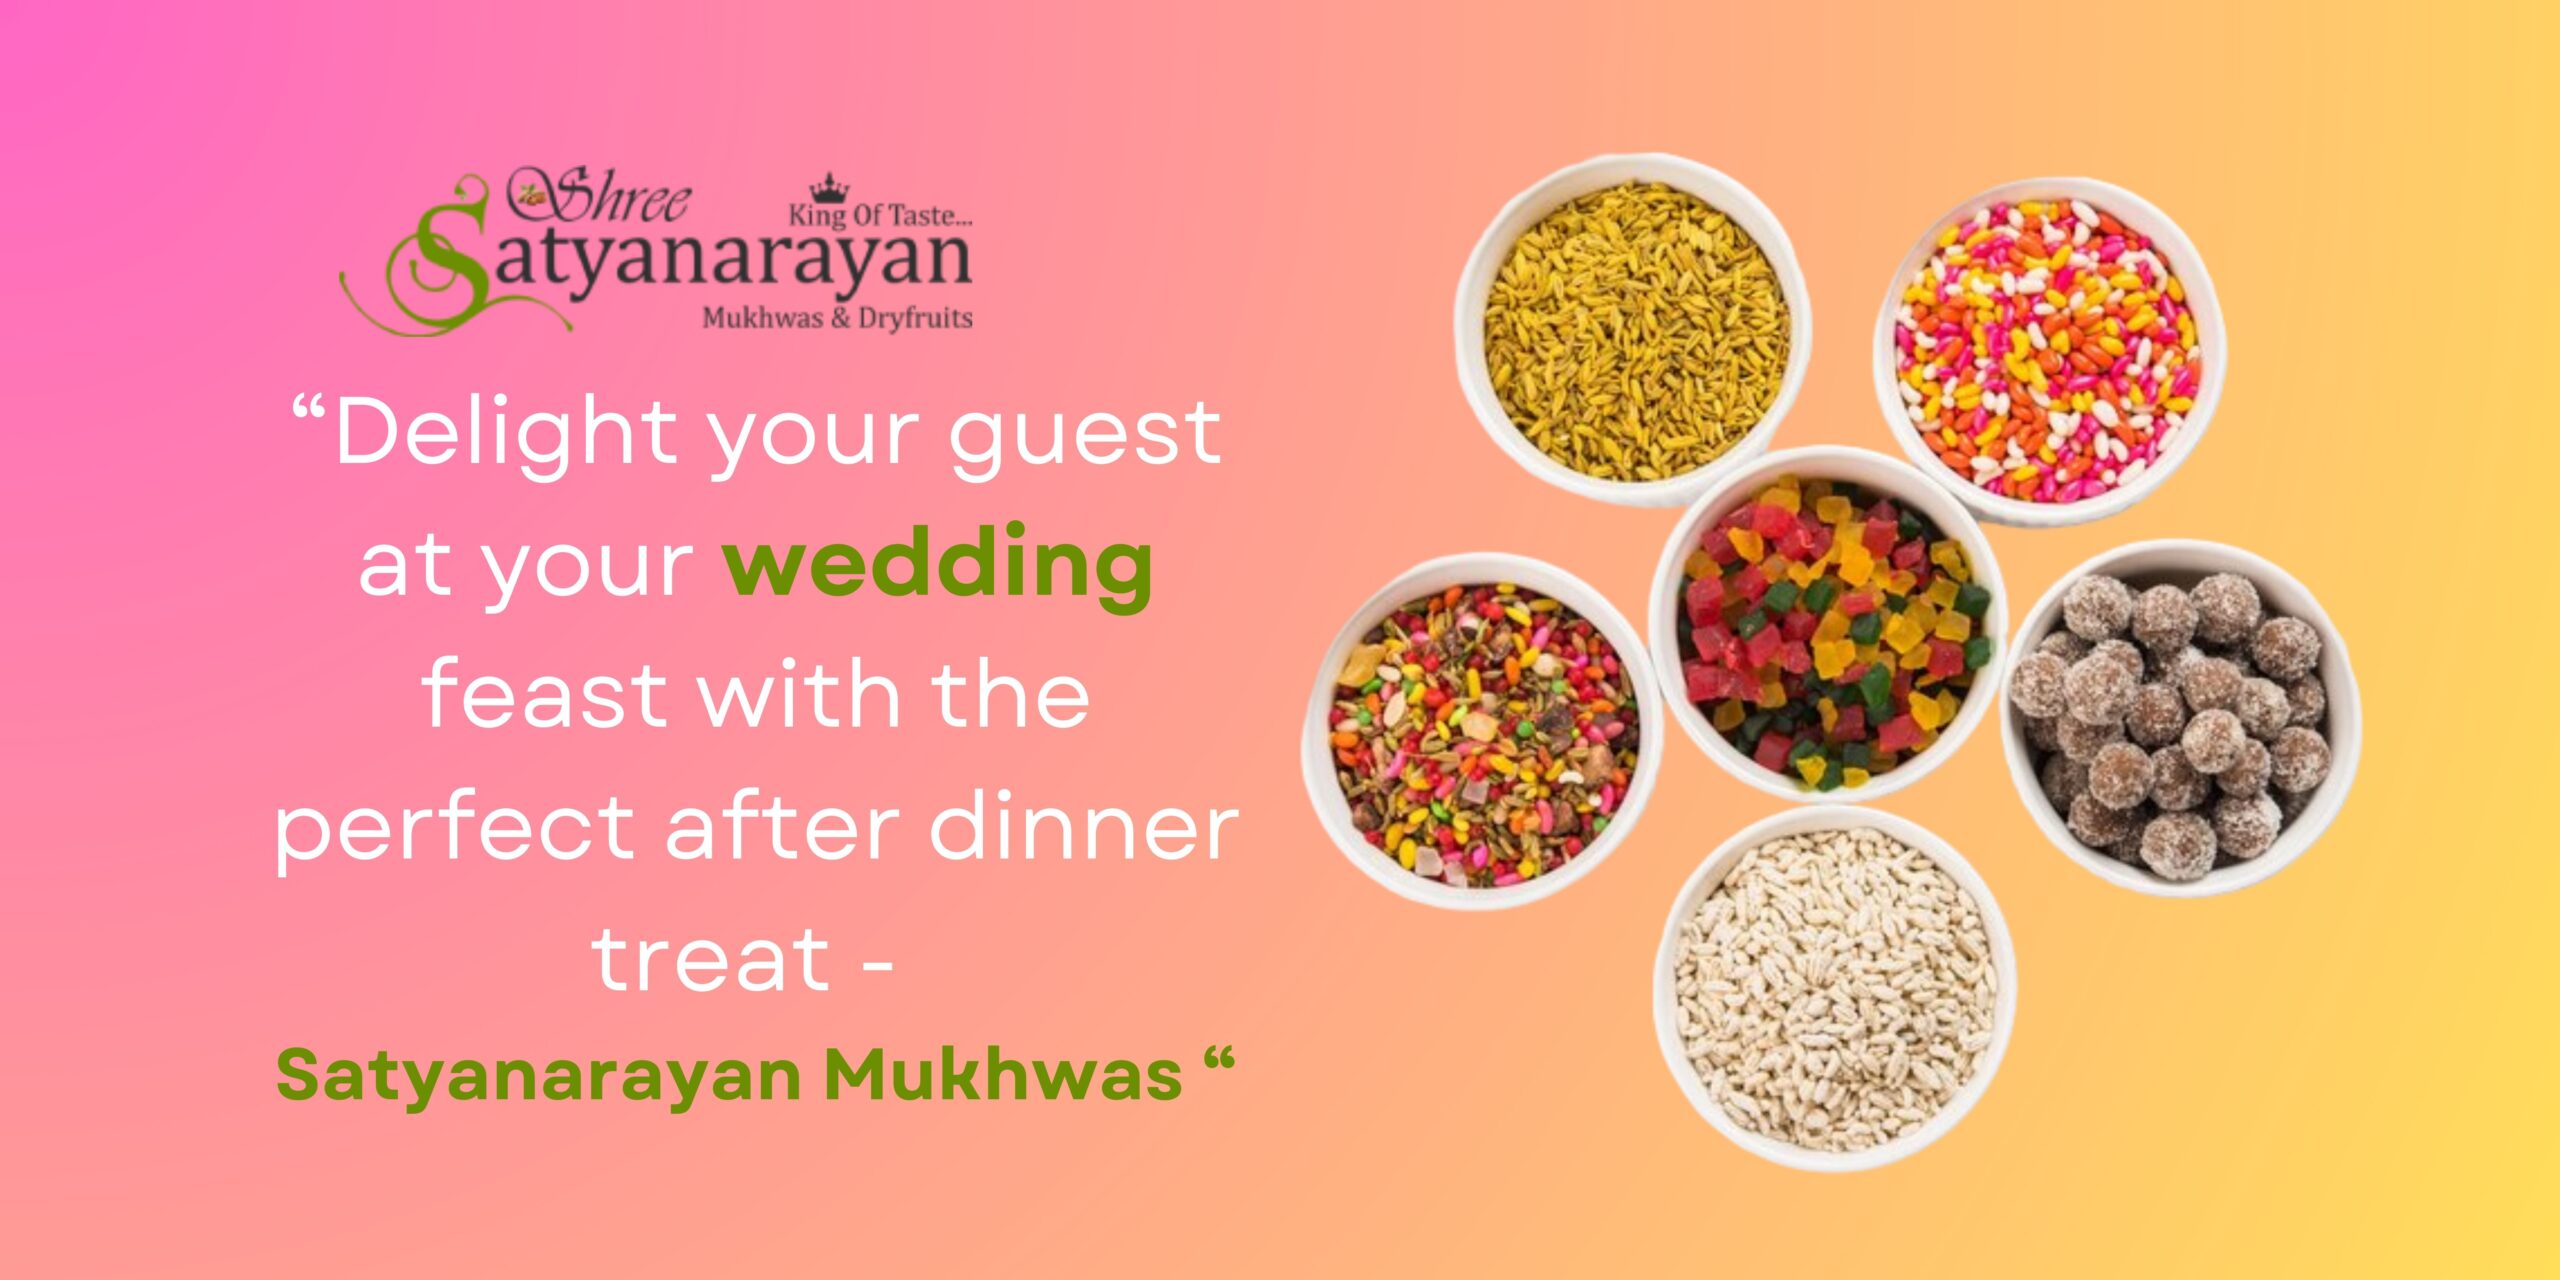 Delight Your Guests at Your Wedding Feast with the Perfect After Dinner Treat – Satyanarayan Mukhwas